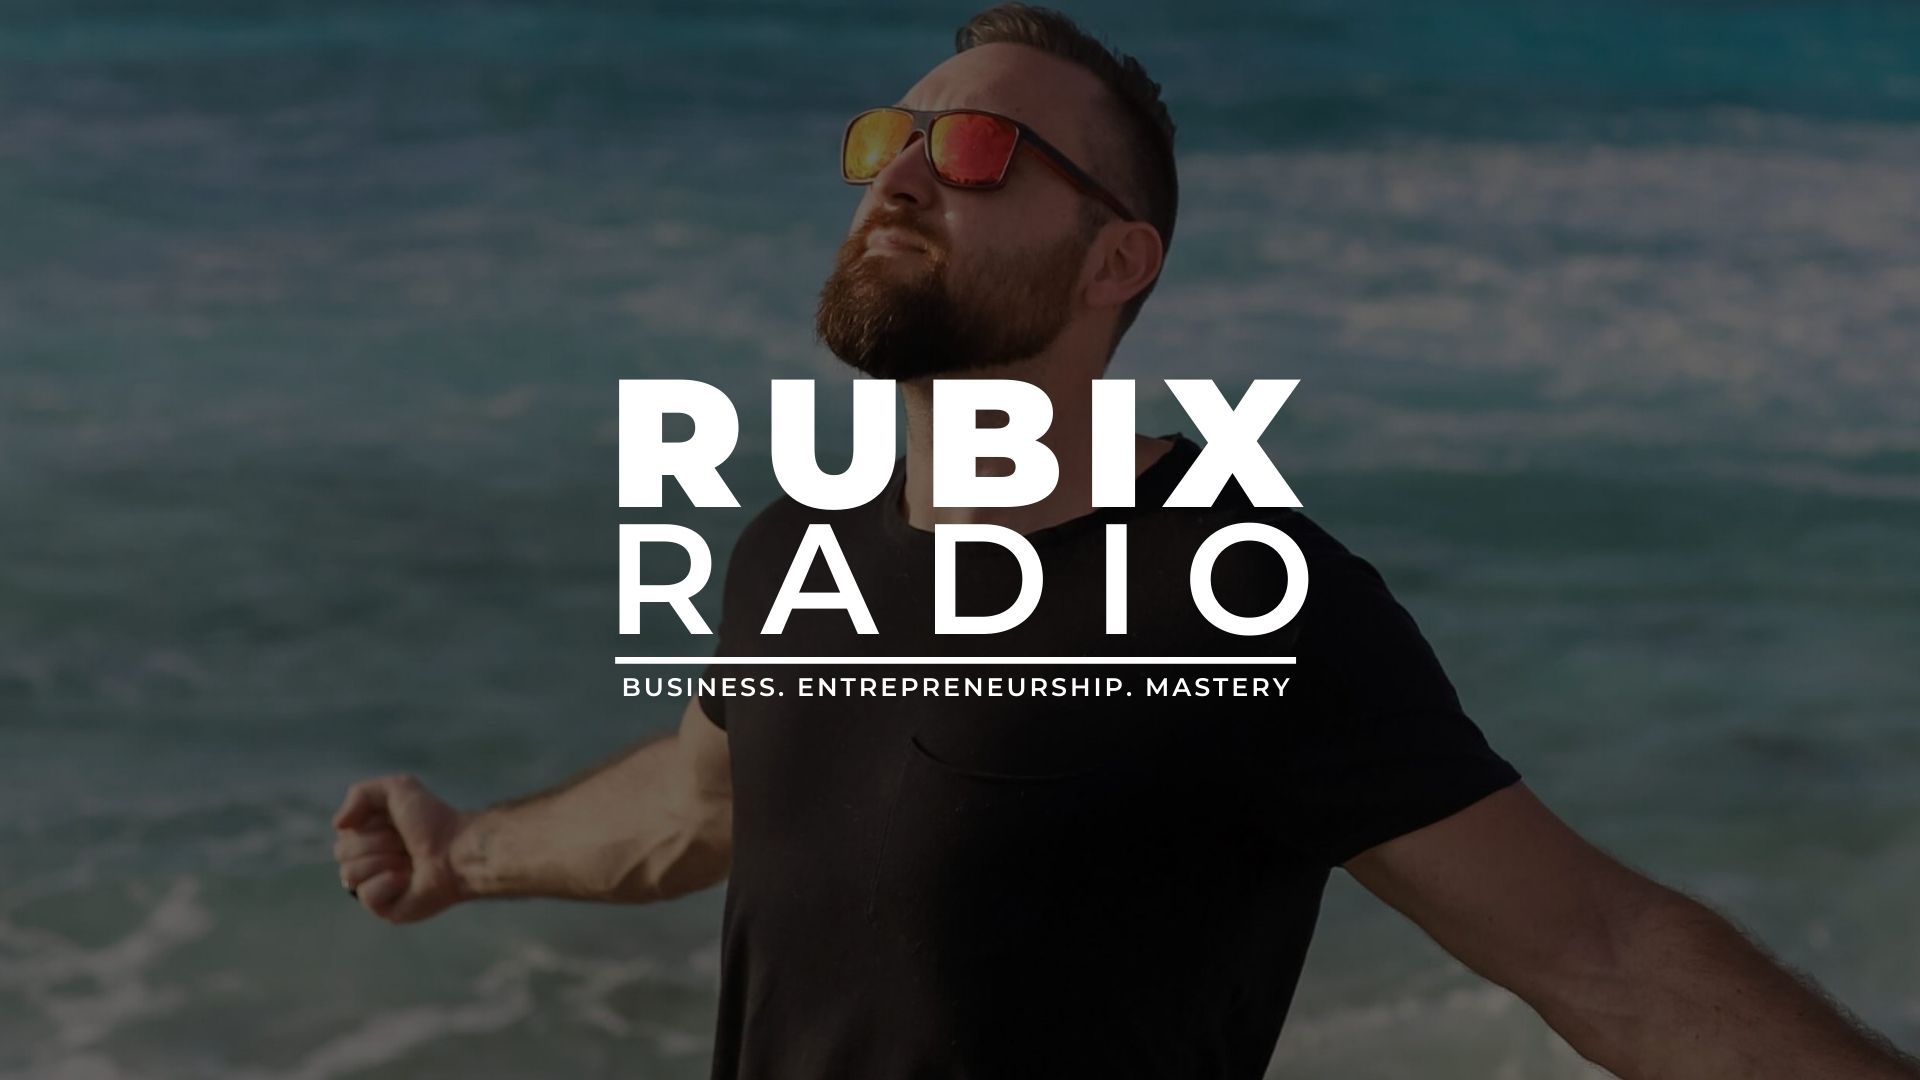 Rubix radio Podcast with Lucas Rubix - Build your online business 1